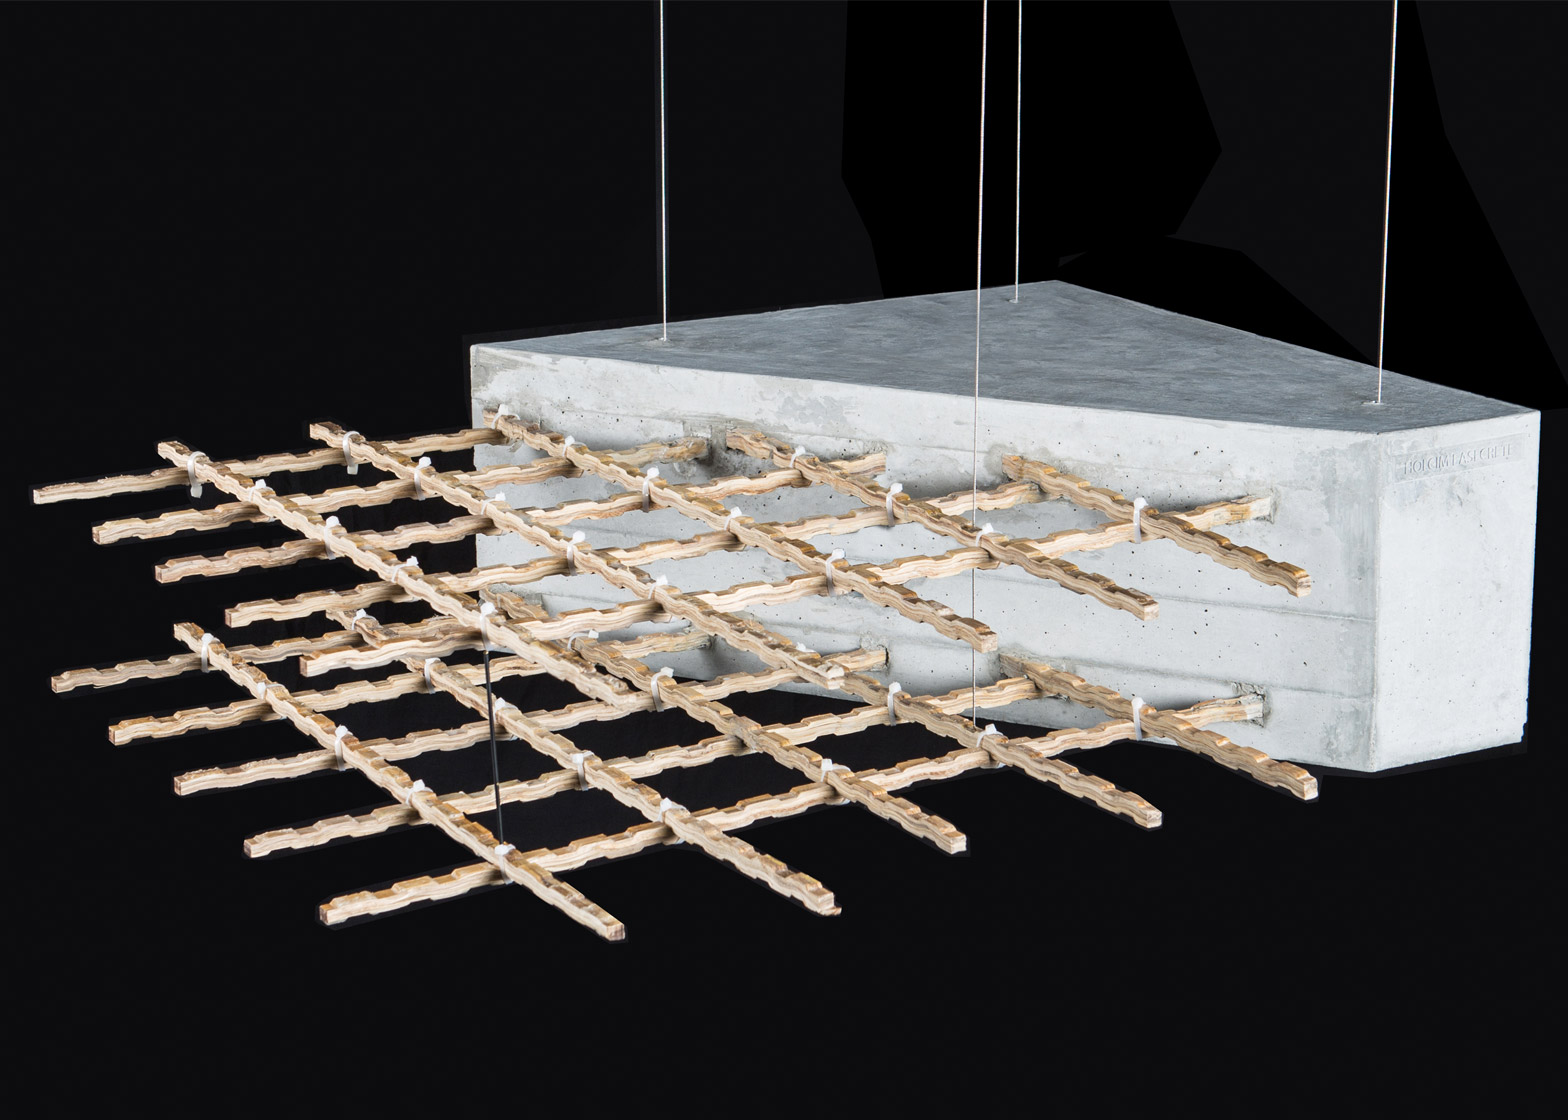 Dirk Hebel on bamboo at World Architecture Festival 2015